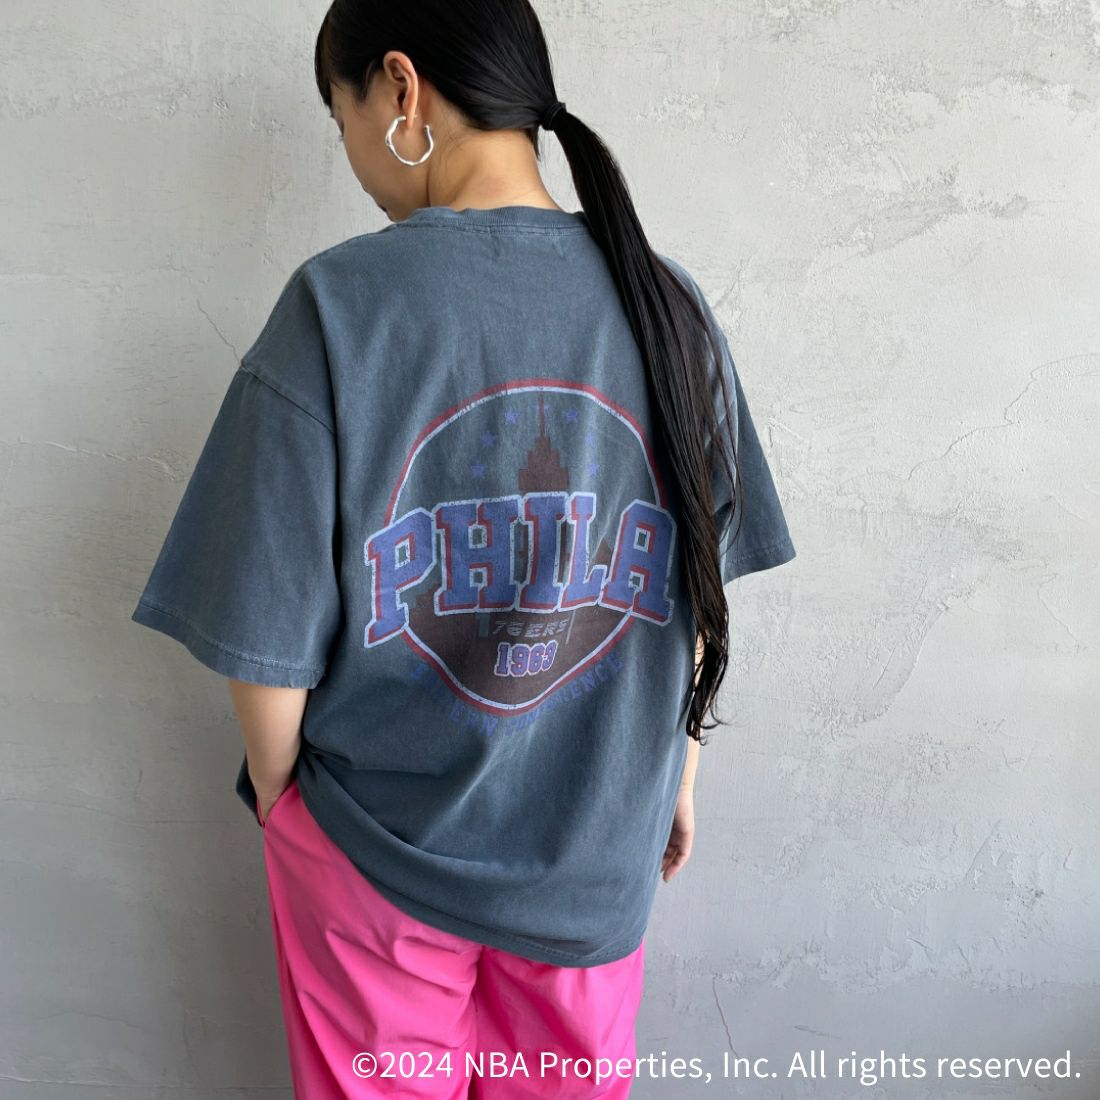 OFF THE COURT BY NBA [オフ ザ コート バイ エヌビーエー] 別注 チームTシャツ [JF-24SS-002-JF] NVY 76ERS &&モデル身長：156cm 着用サイズ：S&&